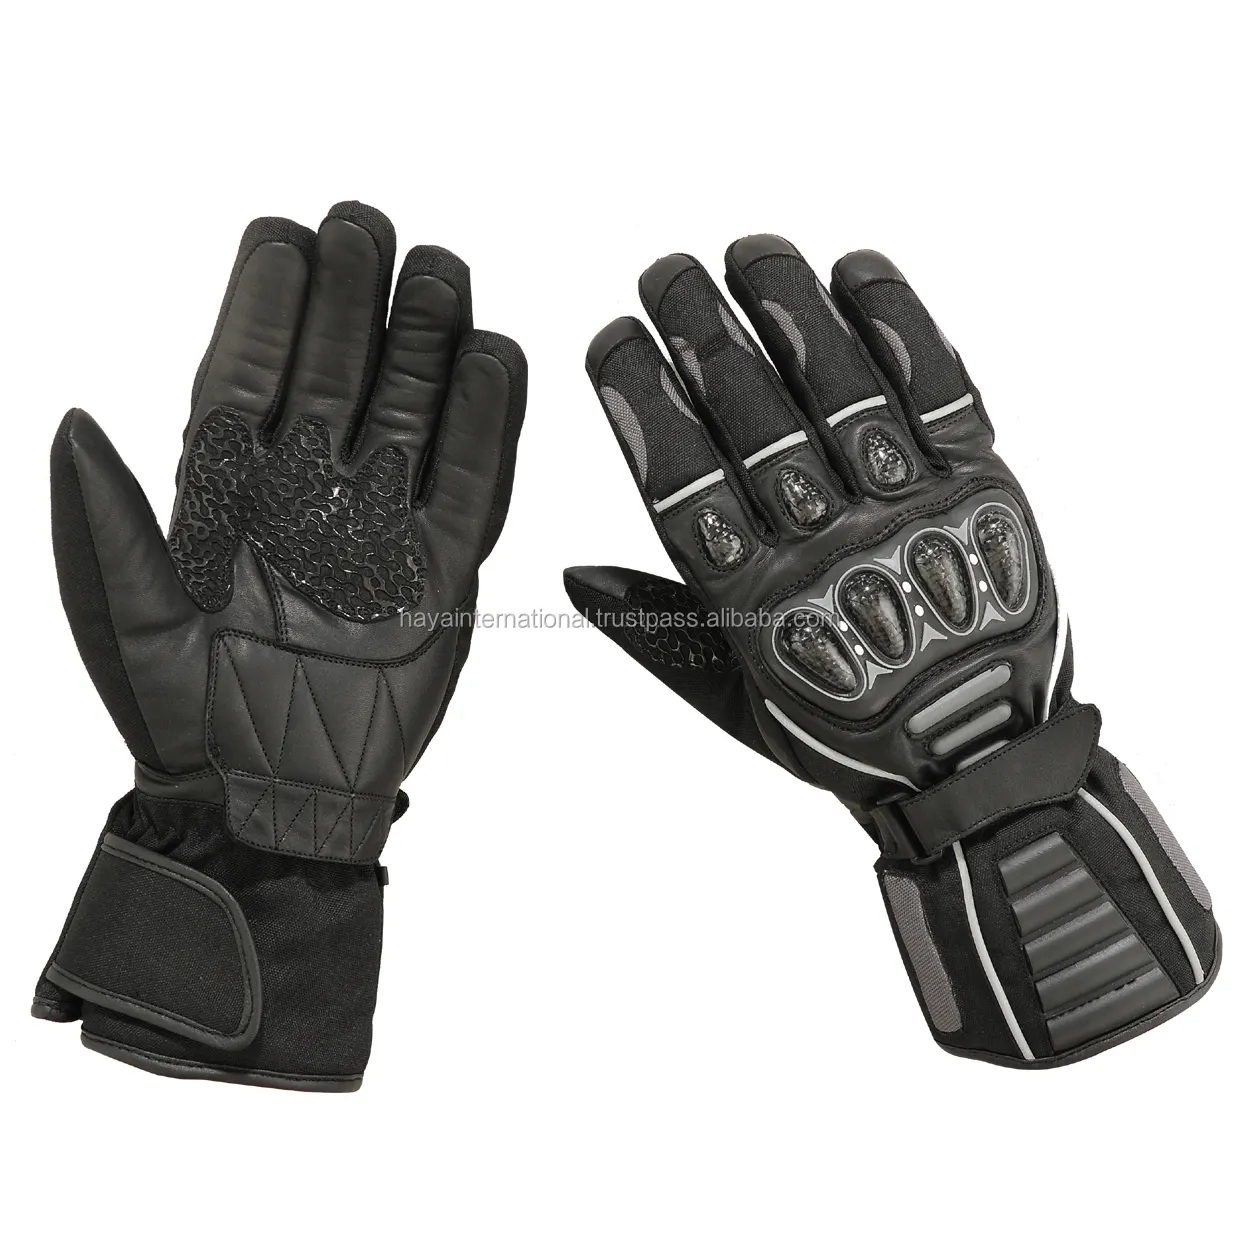 Winter Waterproof Padded Thermal With Protection Outdoor Leather With Palm Reinforcement Motorcycle Gloves